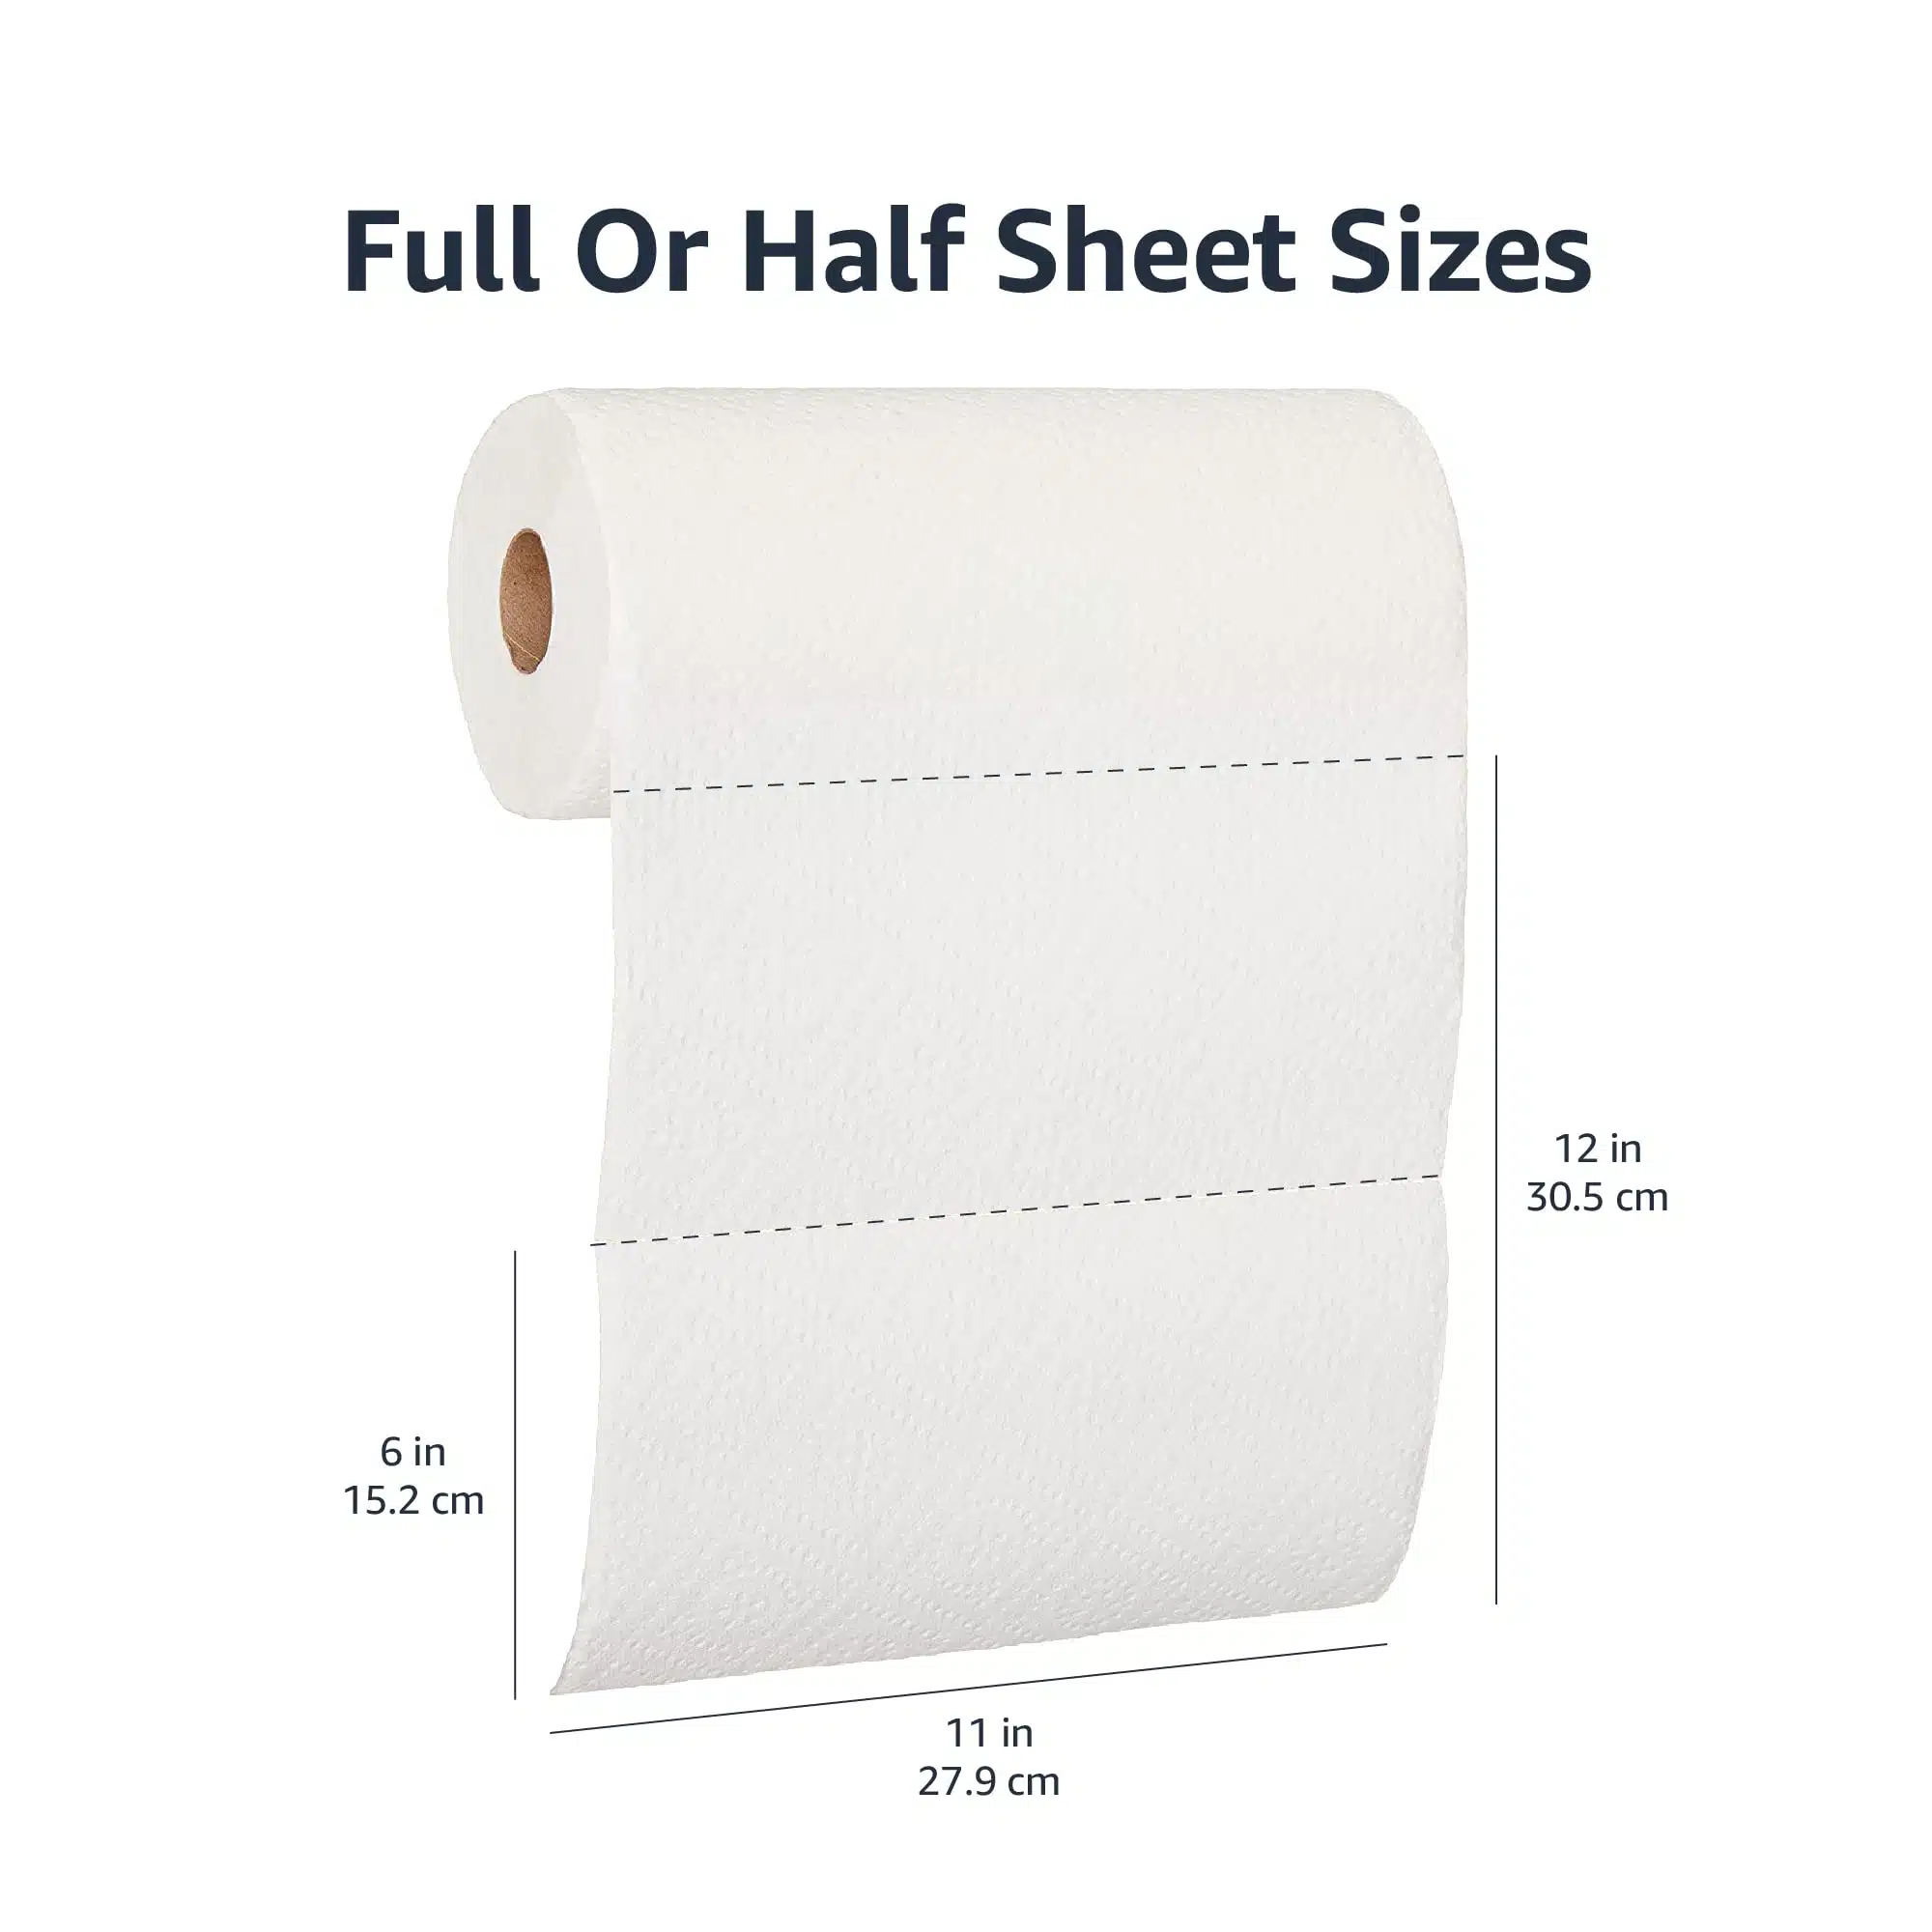 Envelope Size Chart - Help understanding envelope sizes, choose the correct  envelope for your project at PaperPapers